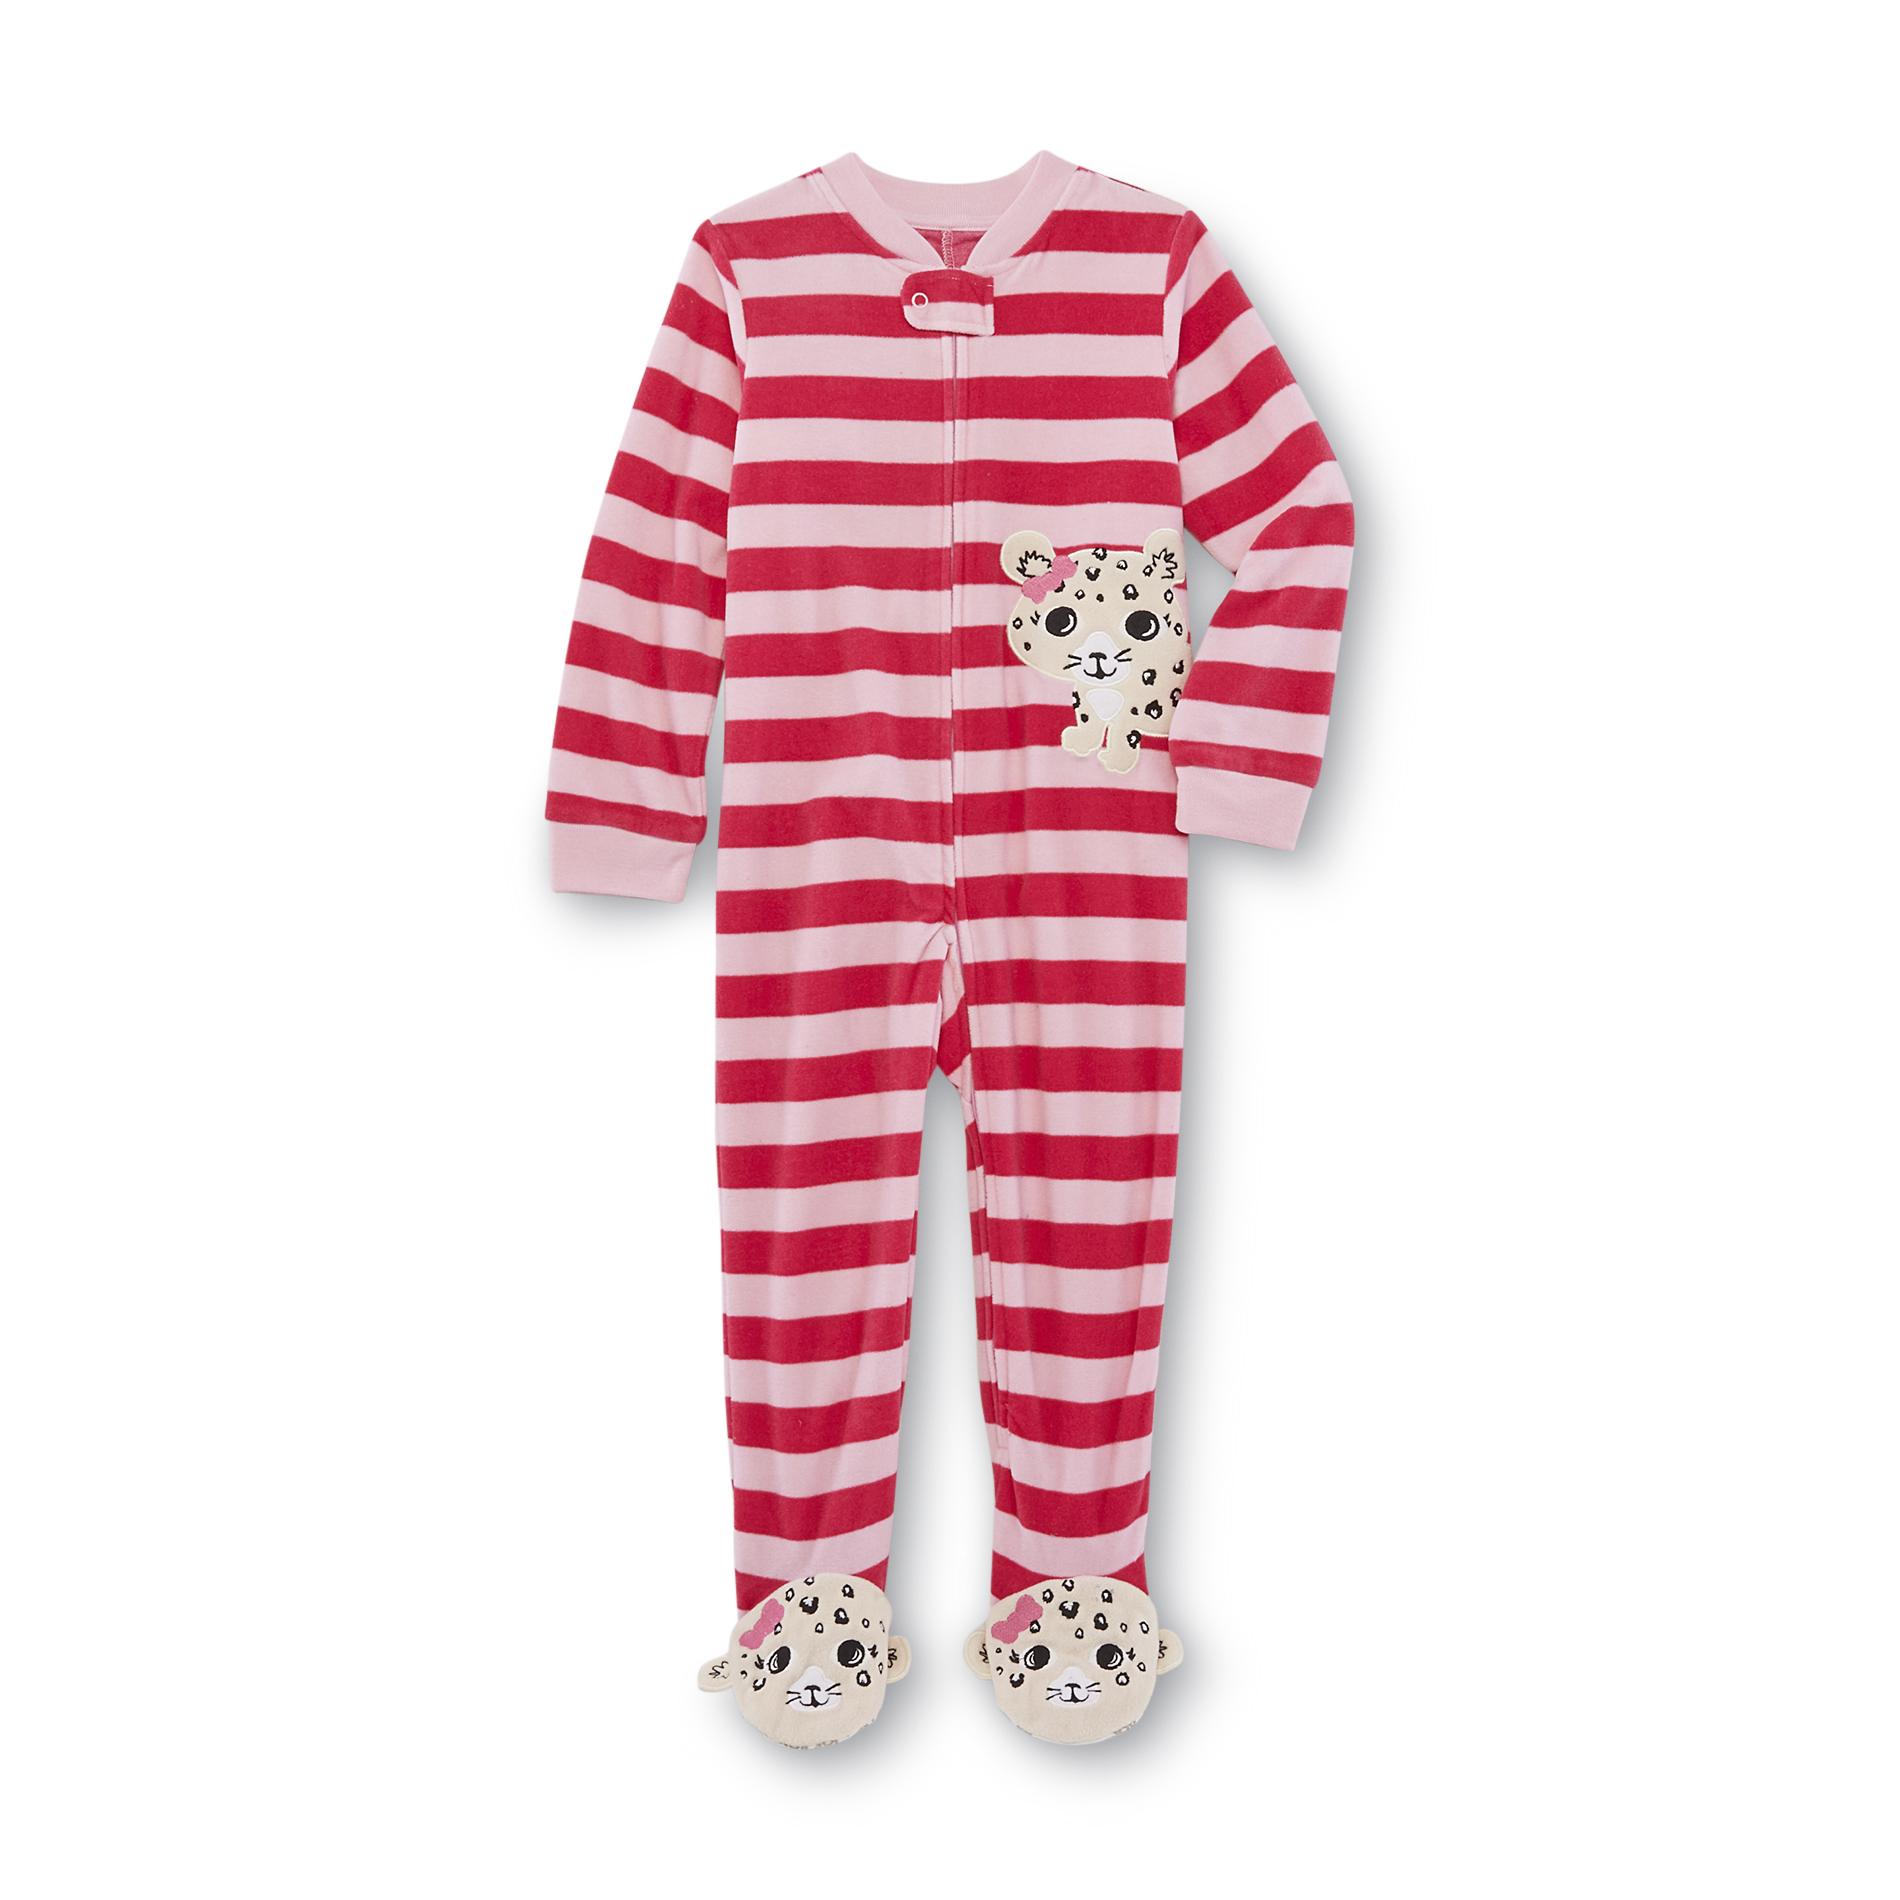 Toddler Girl's Footed Sleeper Pajamas - Striped